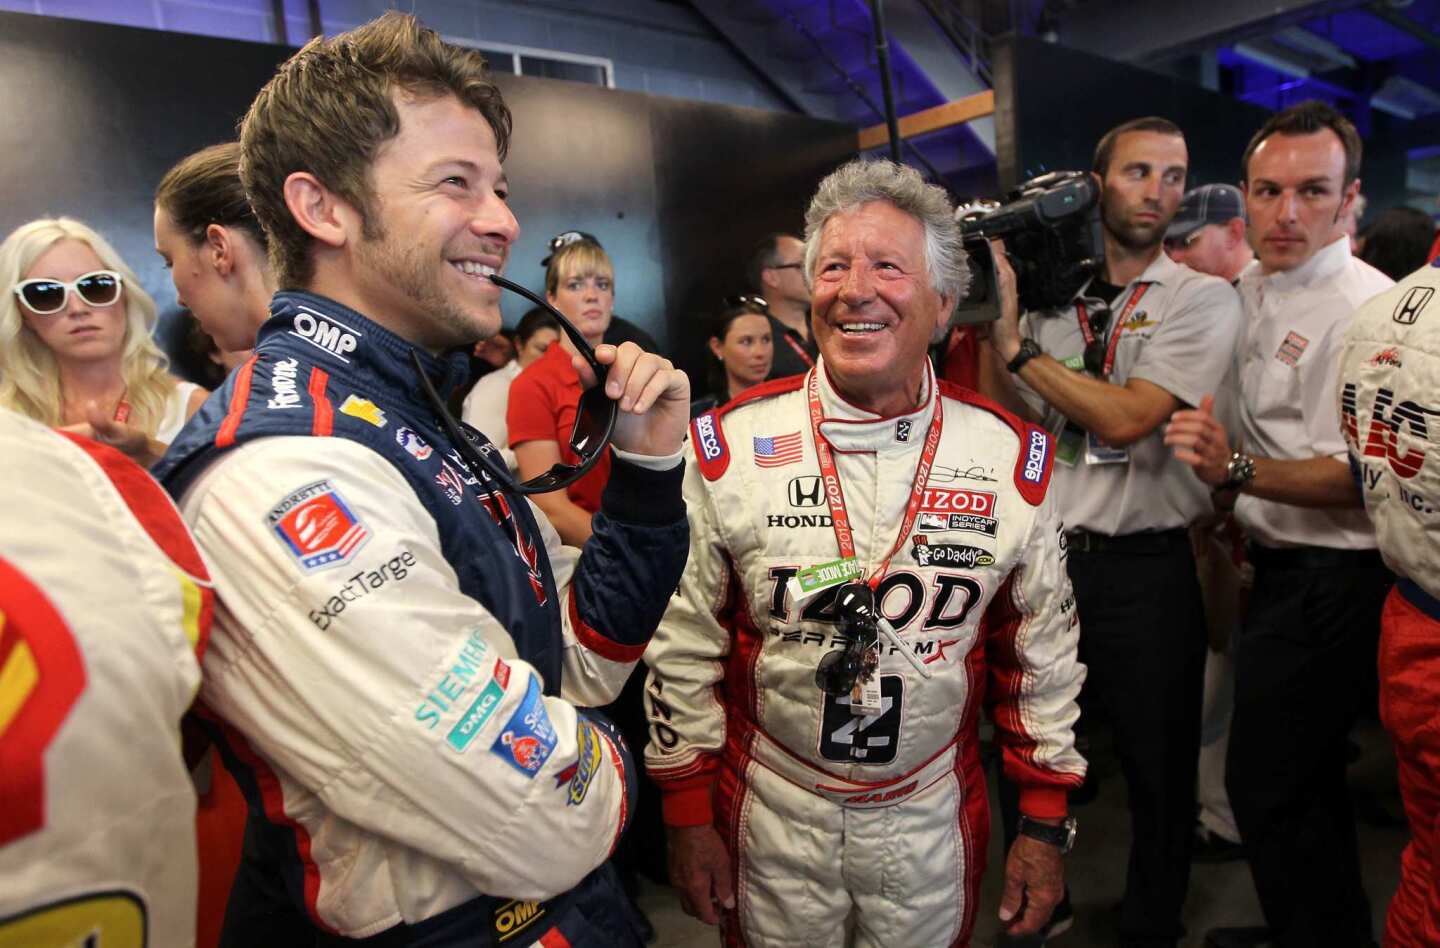 IndyCar driver Marco Andretti, left, shares a laugh before the race Sunday with his grandfather, Mario Andretti, the 1969 Indy 500 winner.